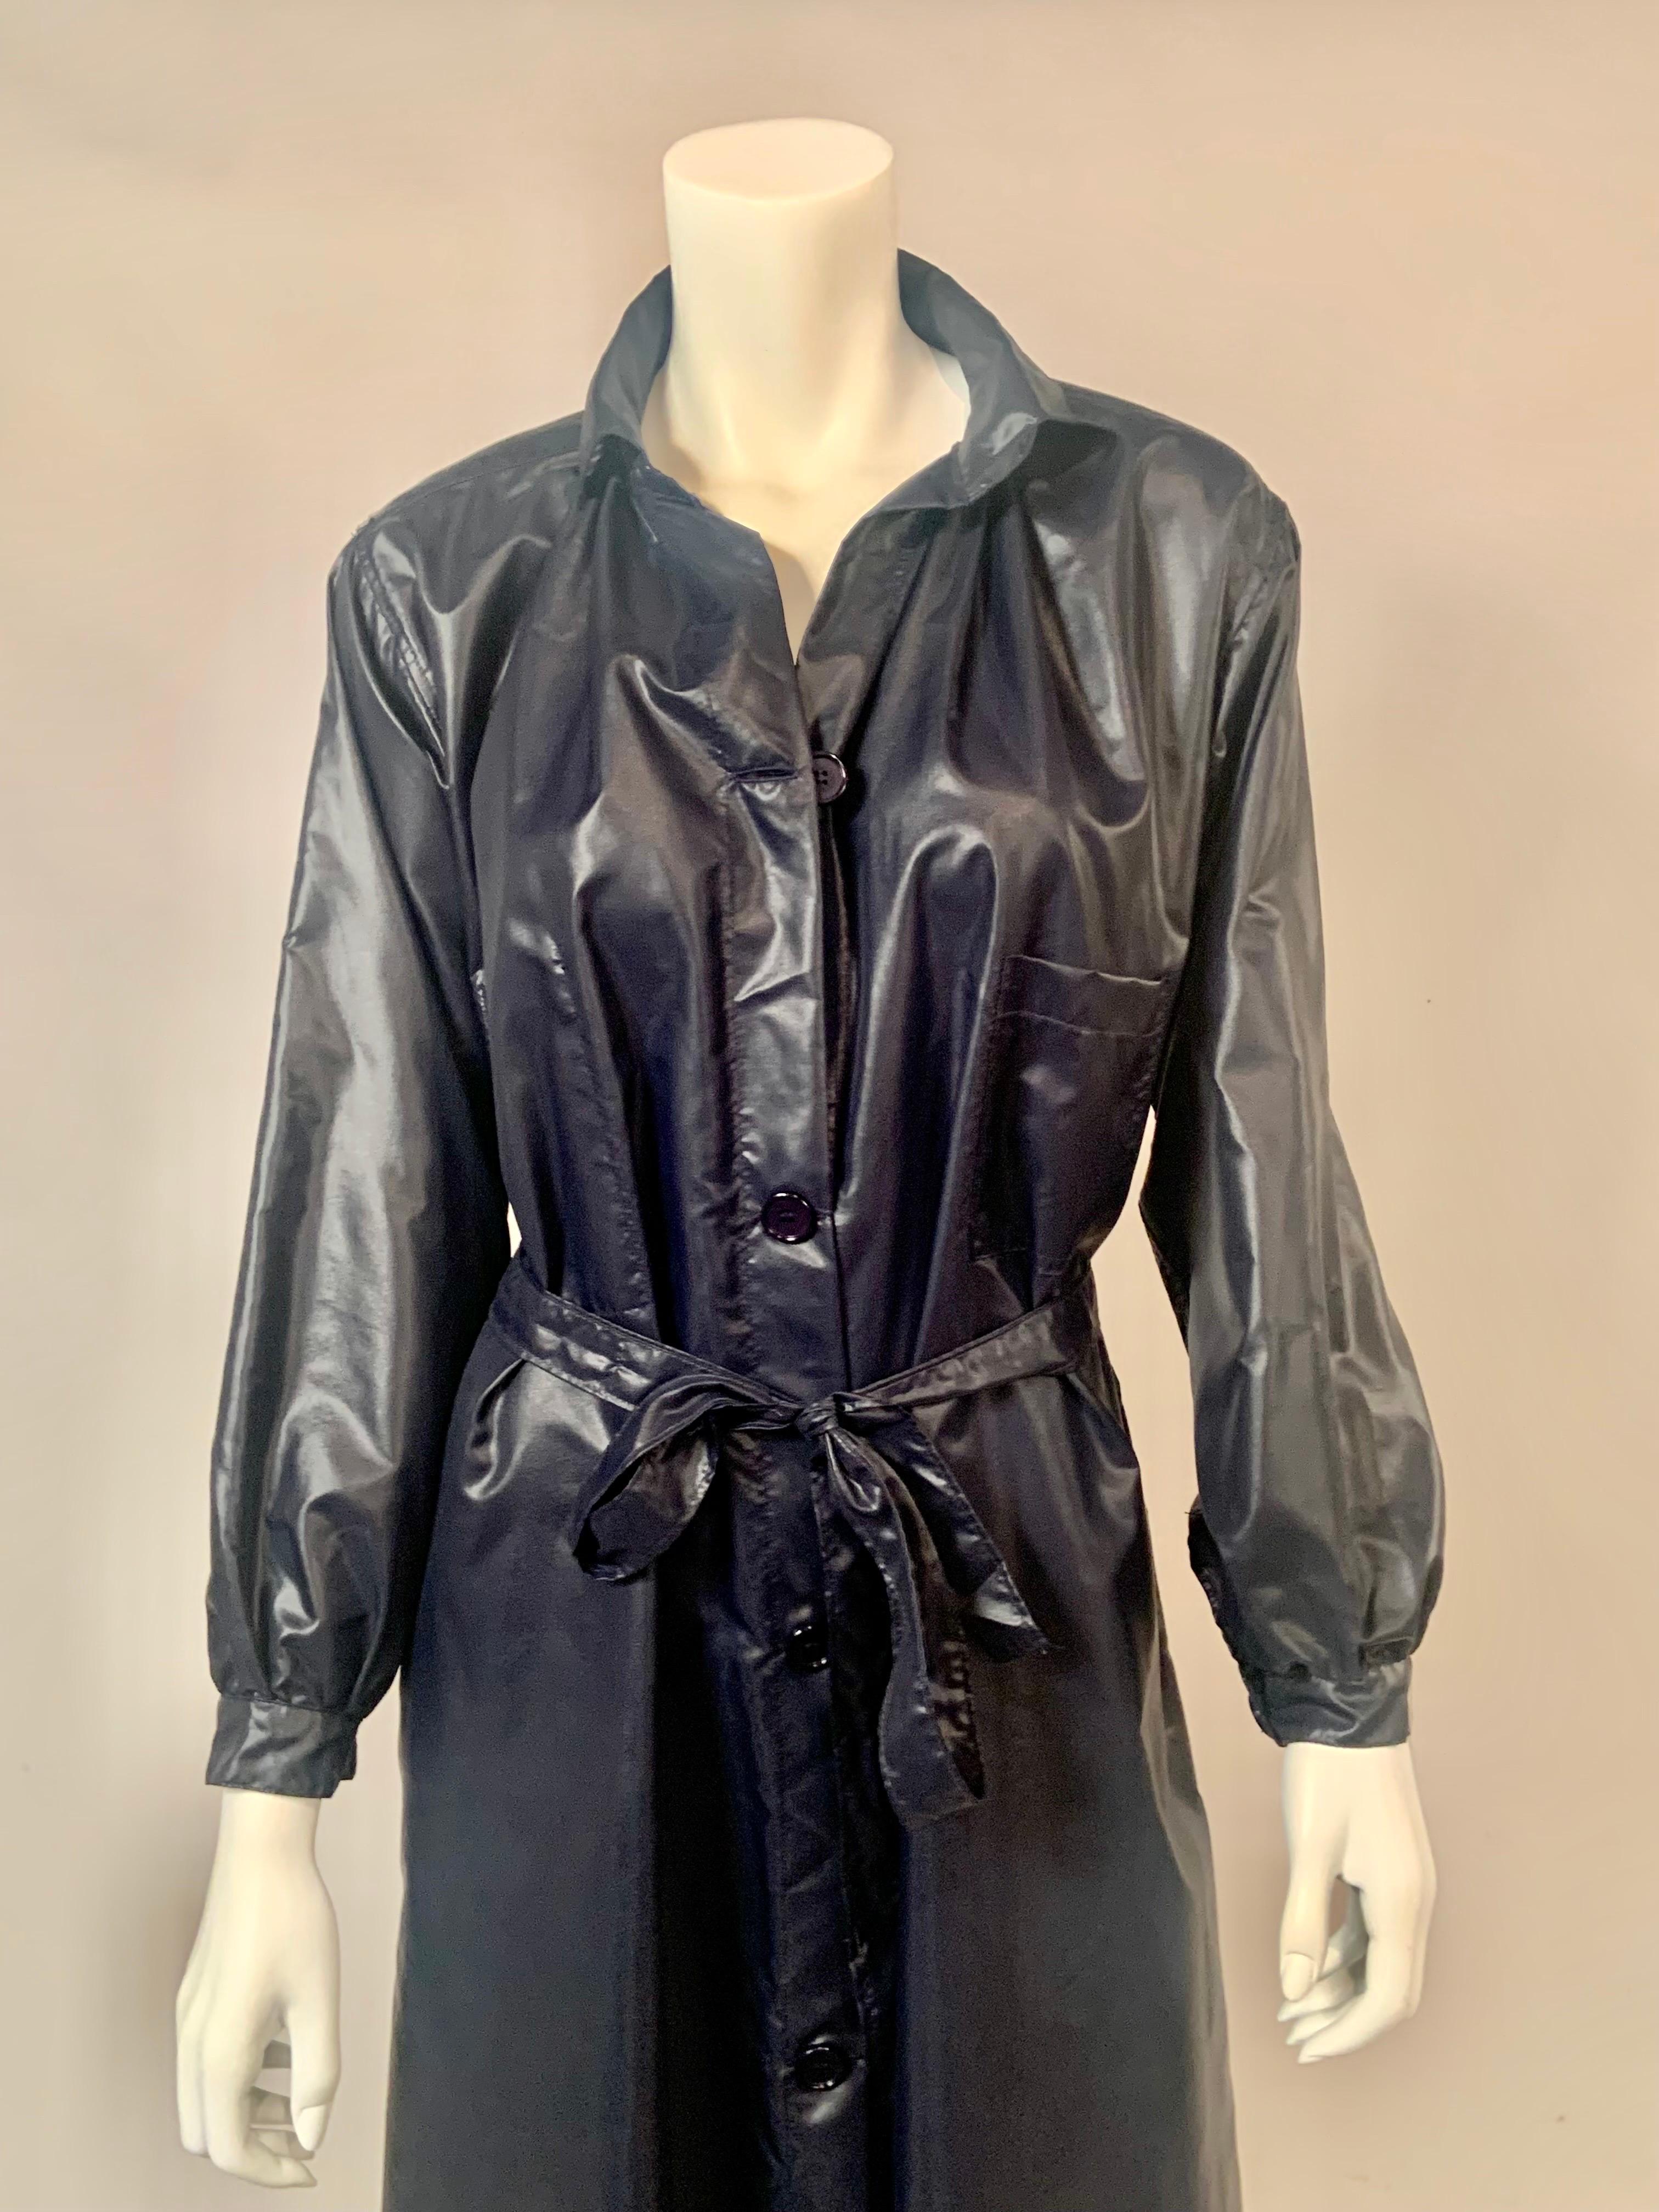 This 1970's navy blue rain slicker designed by Dorothee Bis for Henri Bendel in New York City will keep you stylishly dry on a rainy day.  The coat has five buttons at the center front, a left side breast pocket and a right side interior breast